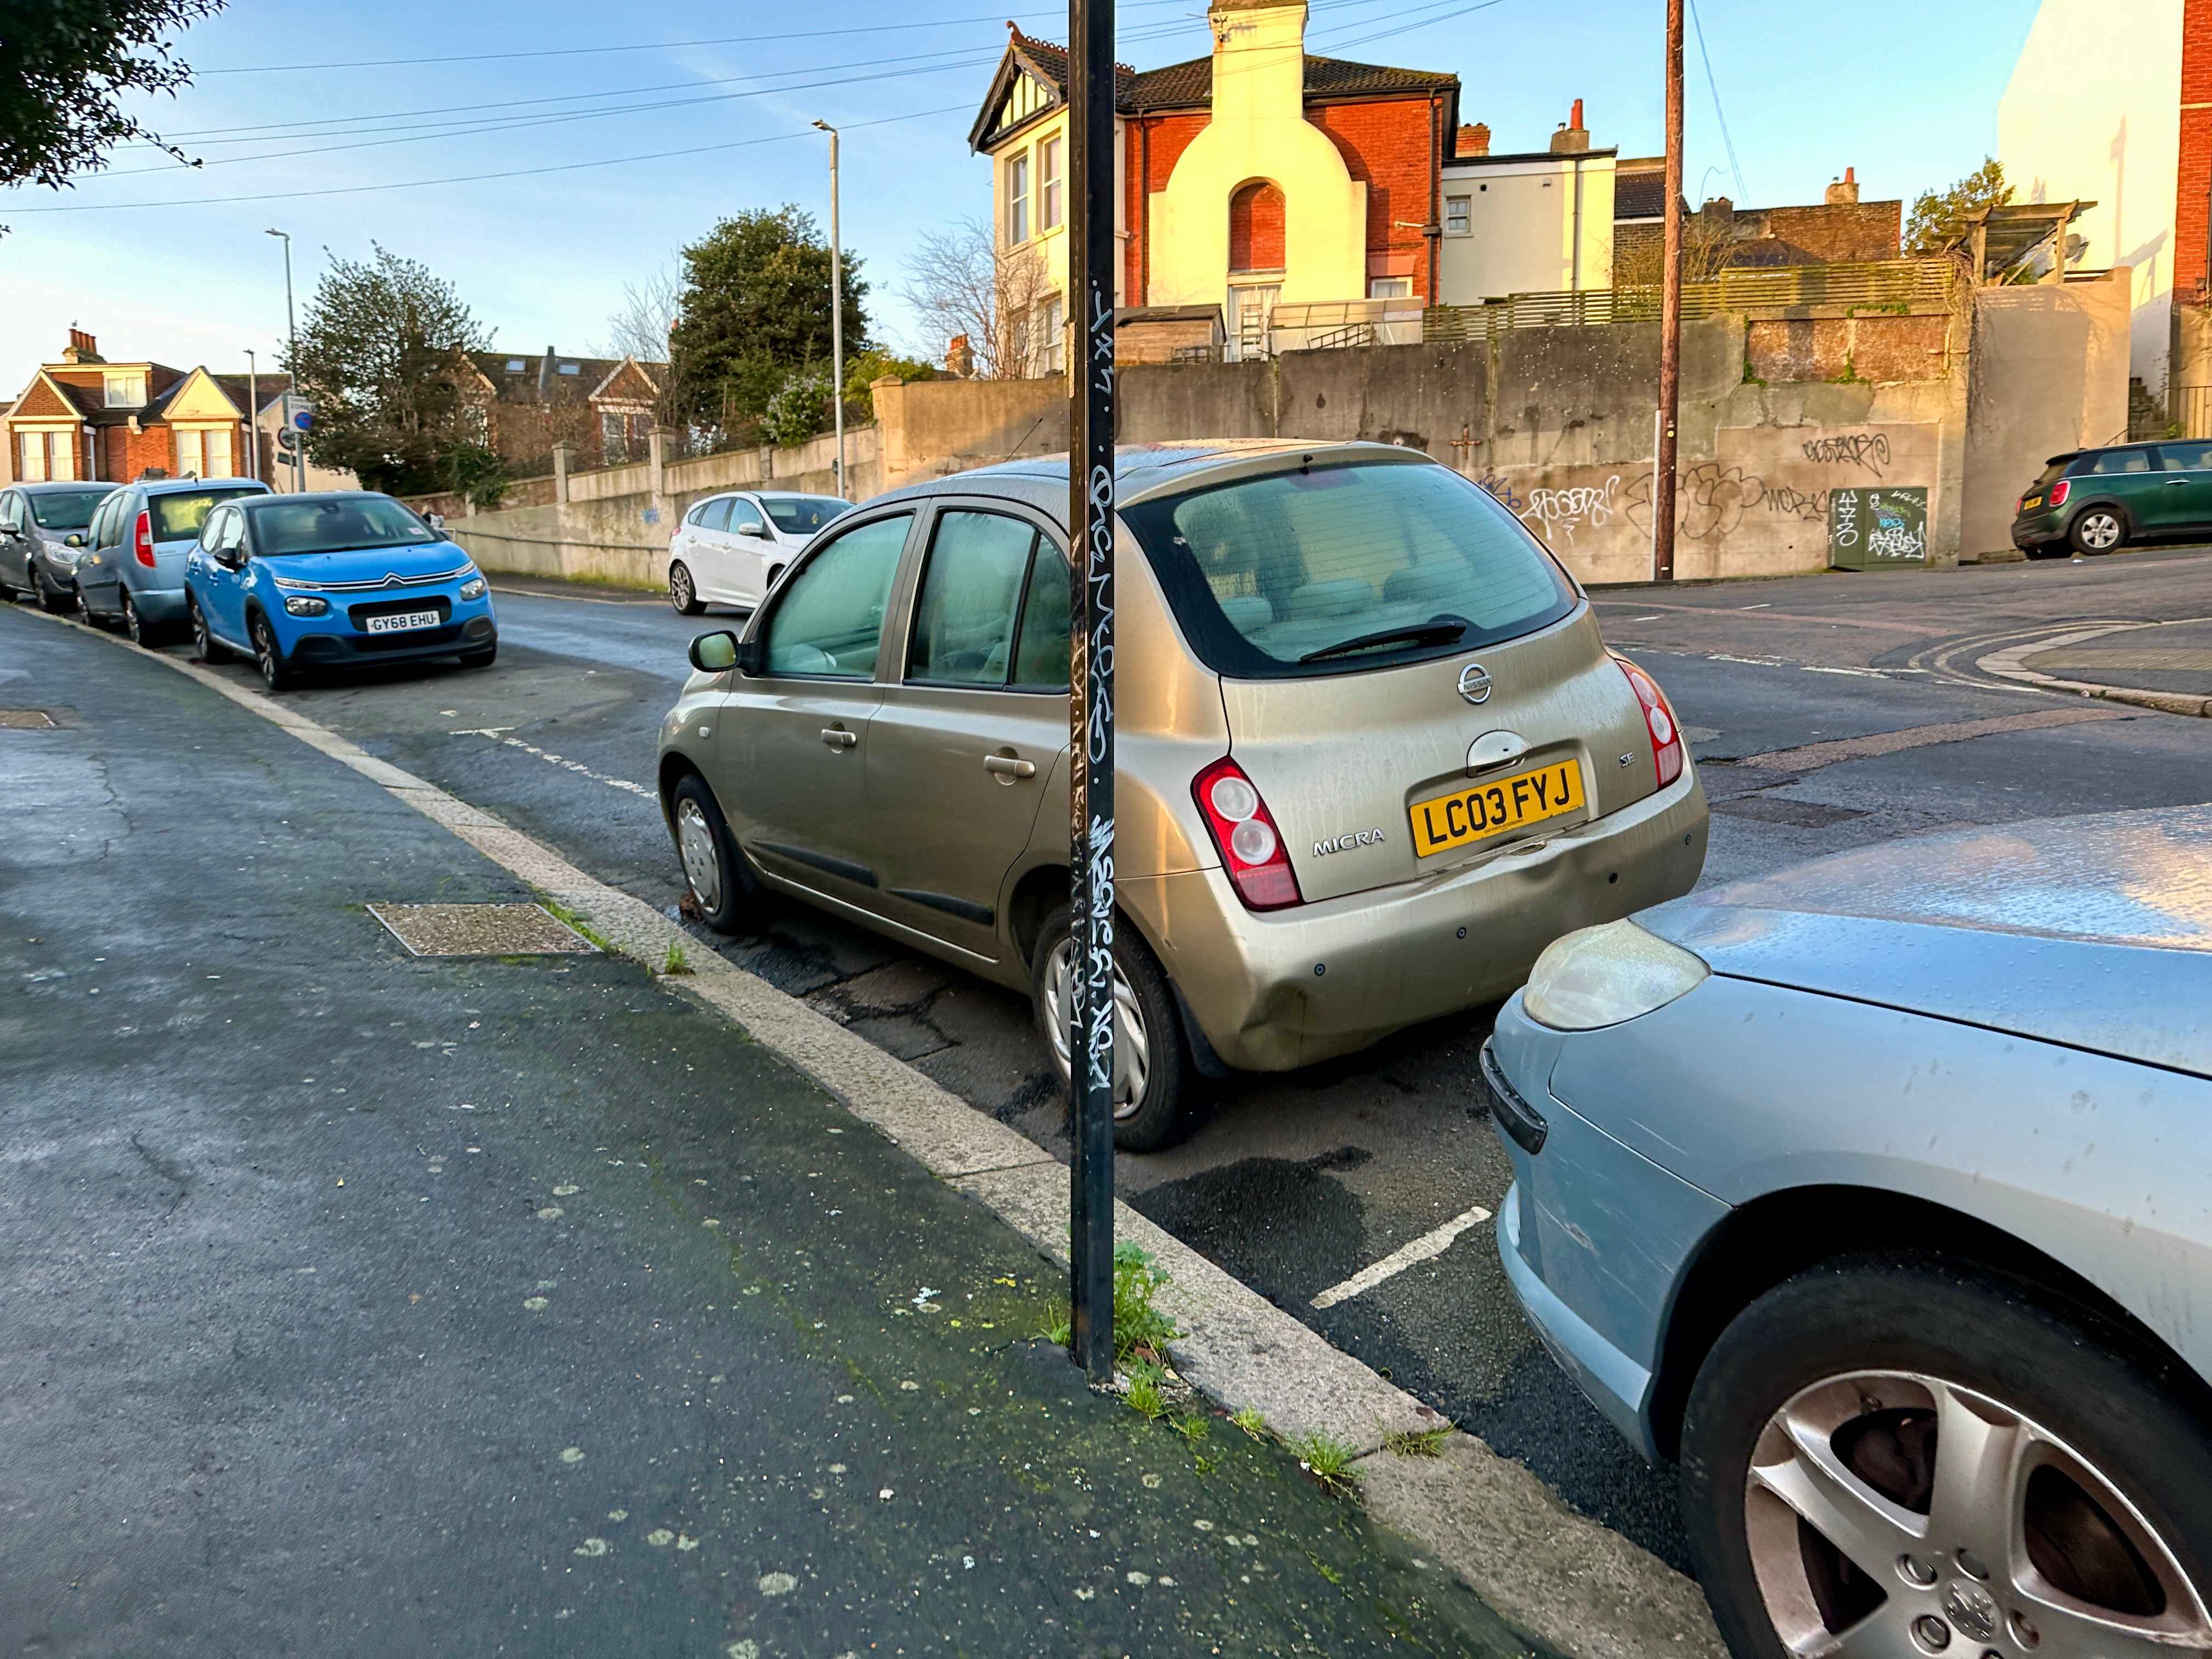 Photograph of LC03 FYJ - a Gold Nissan Micra parked in Hollingdean by a non-resident, and potentially abandoned. The eleventh of seventeen photographs supplied by the residents of Hollingdean.